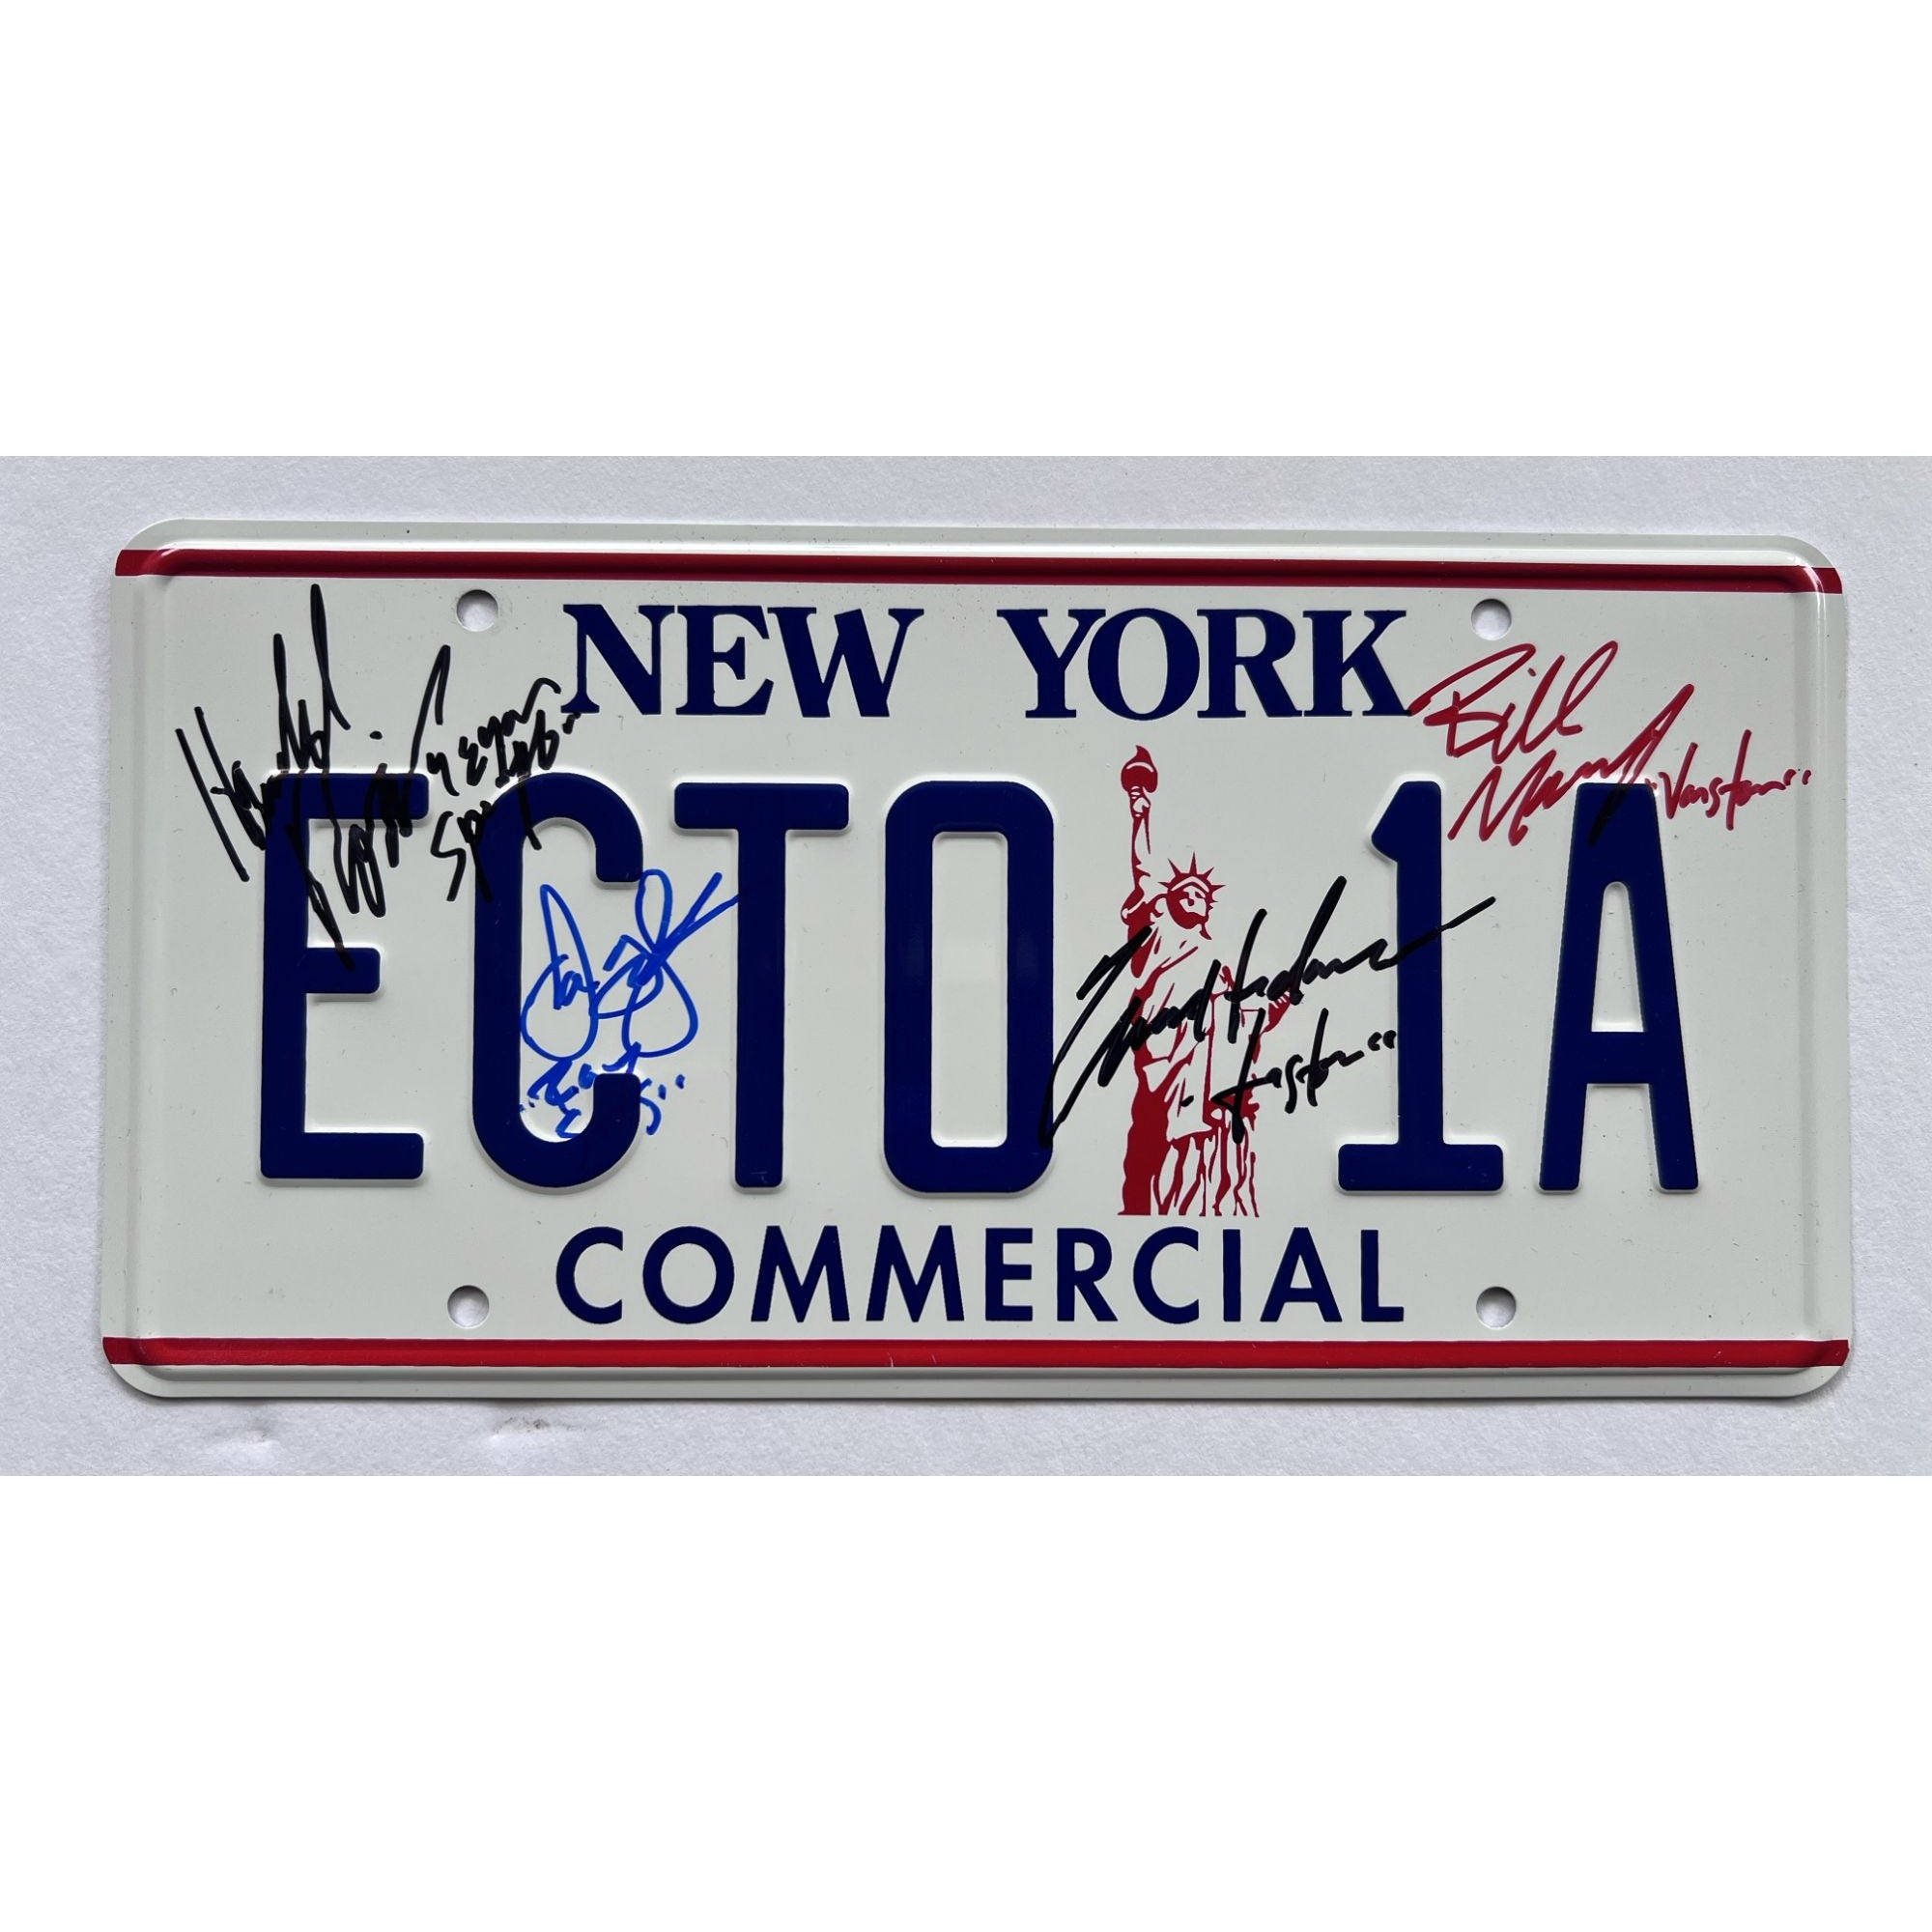 Ghostbusters Bill Murray Dan Aykroyd Sigourney Weaver Harold Ramis Ernie Hudson authentic license plate signed with proof